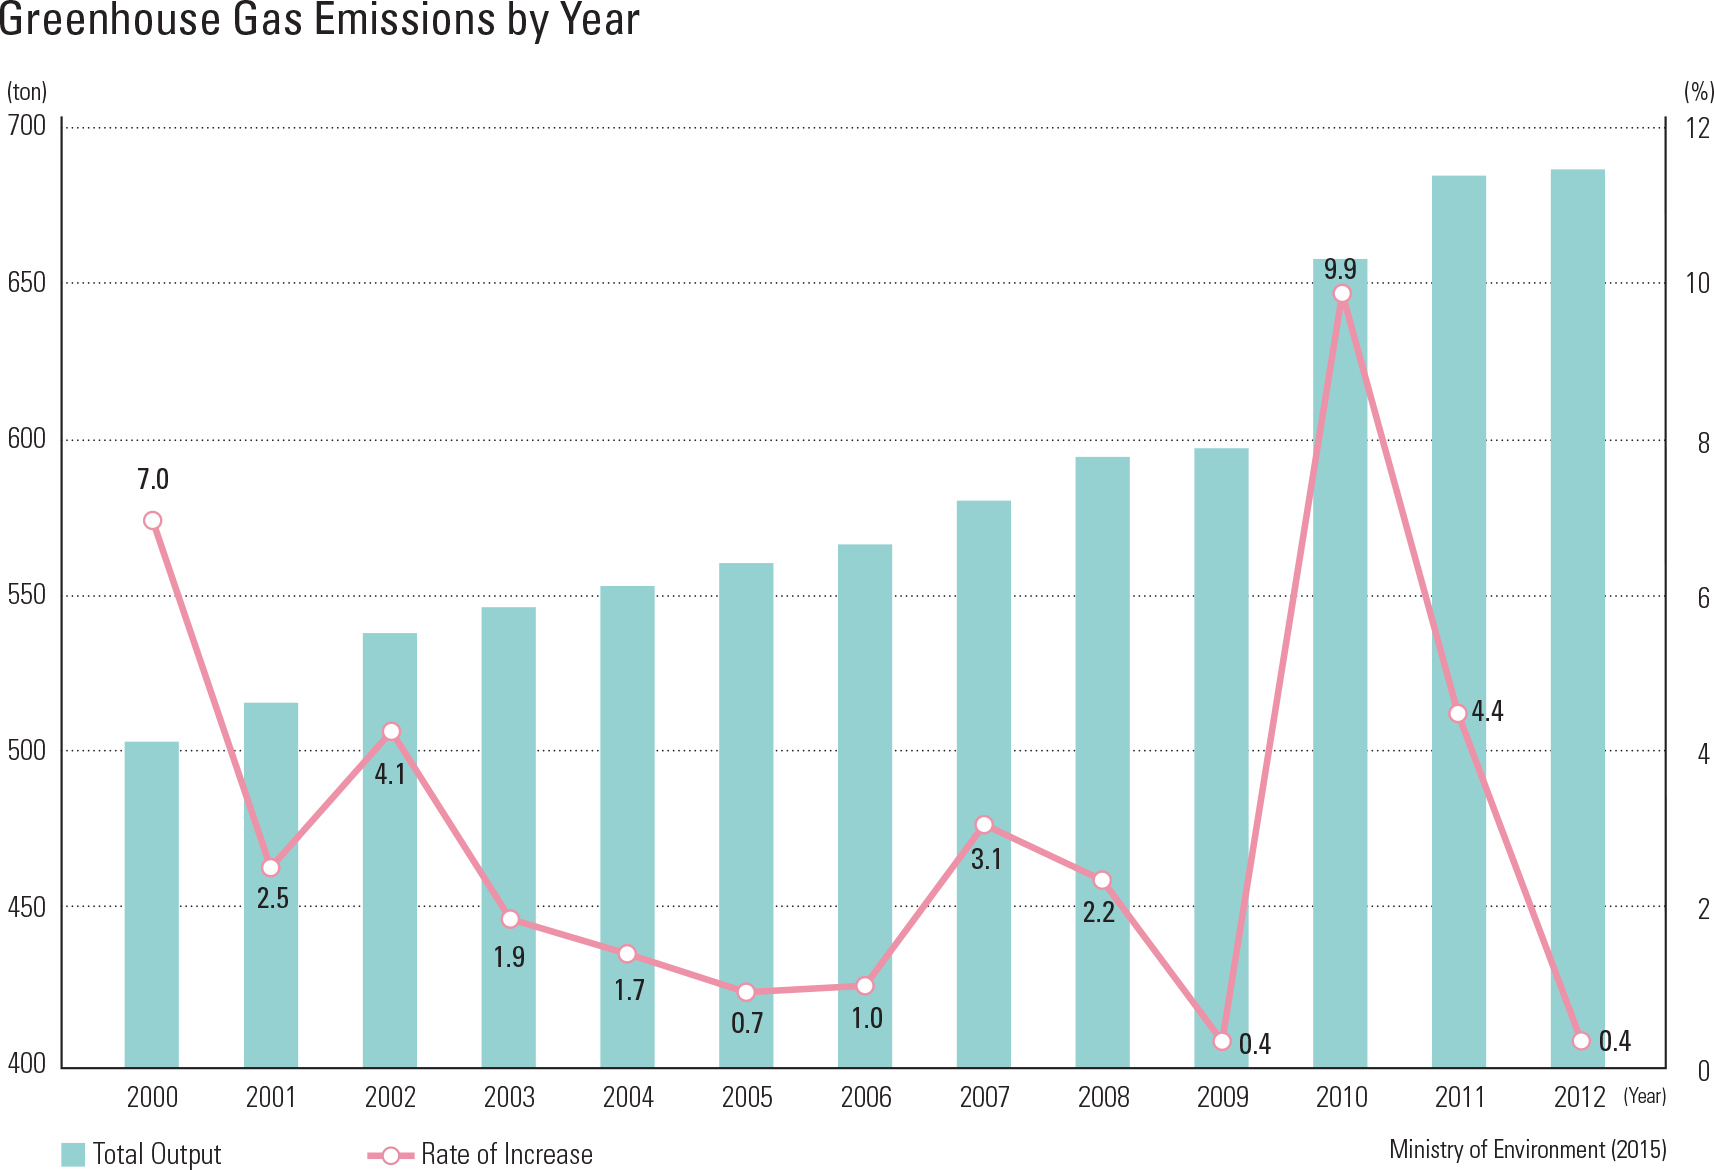 Greenhouse Gas Emissions by Year<p class="oz_zoom" zimg="http://imagedata.cafe24.com/us_2/us2_228-3_2.jpg"><span style="font-family:Nanum Myeongjo;"><span style="font-size:18px;"><span class="label label-danger">UPDATE DATA</span></span></p>